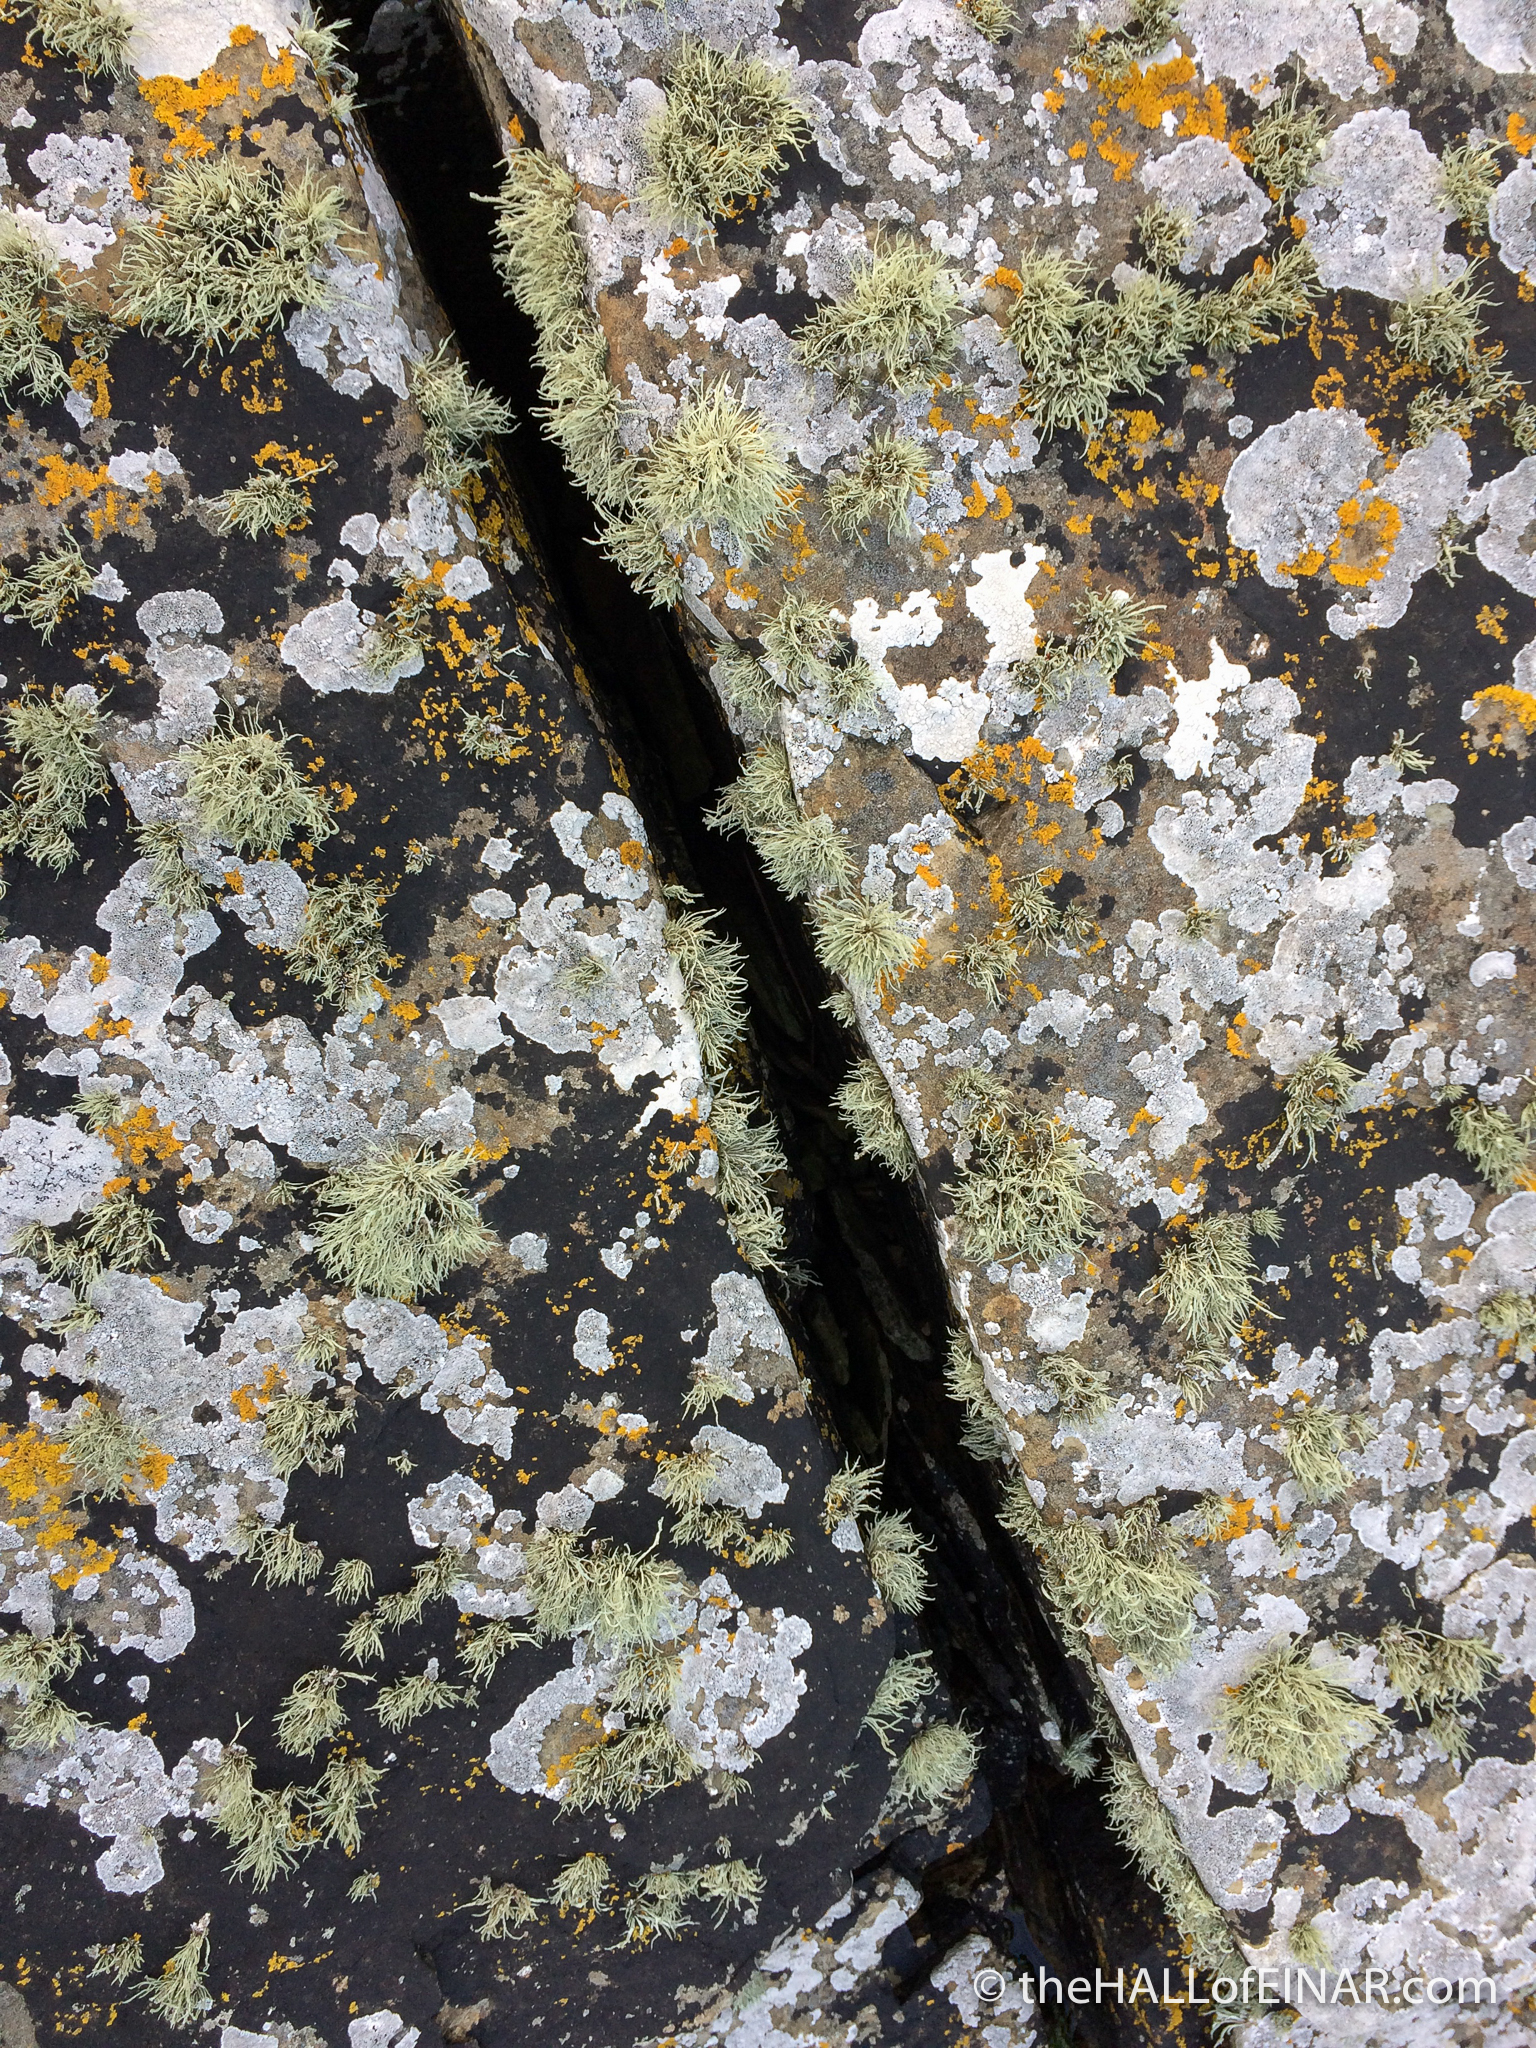 Lichen on the rocks - The Hall of Einar - photograph (c) David Bailey (not the)